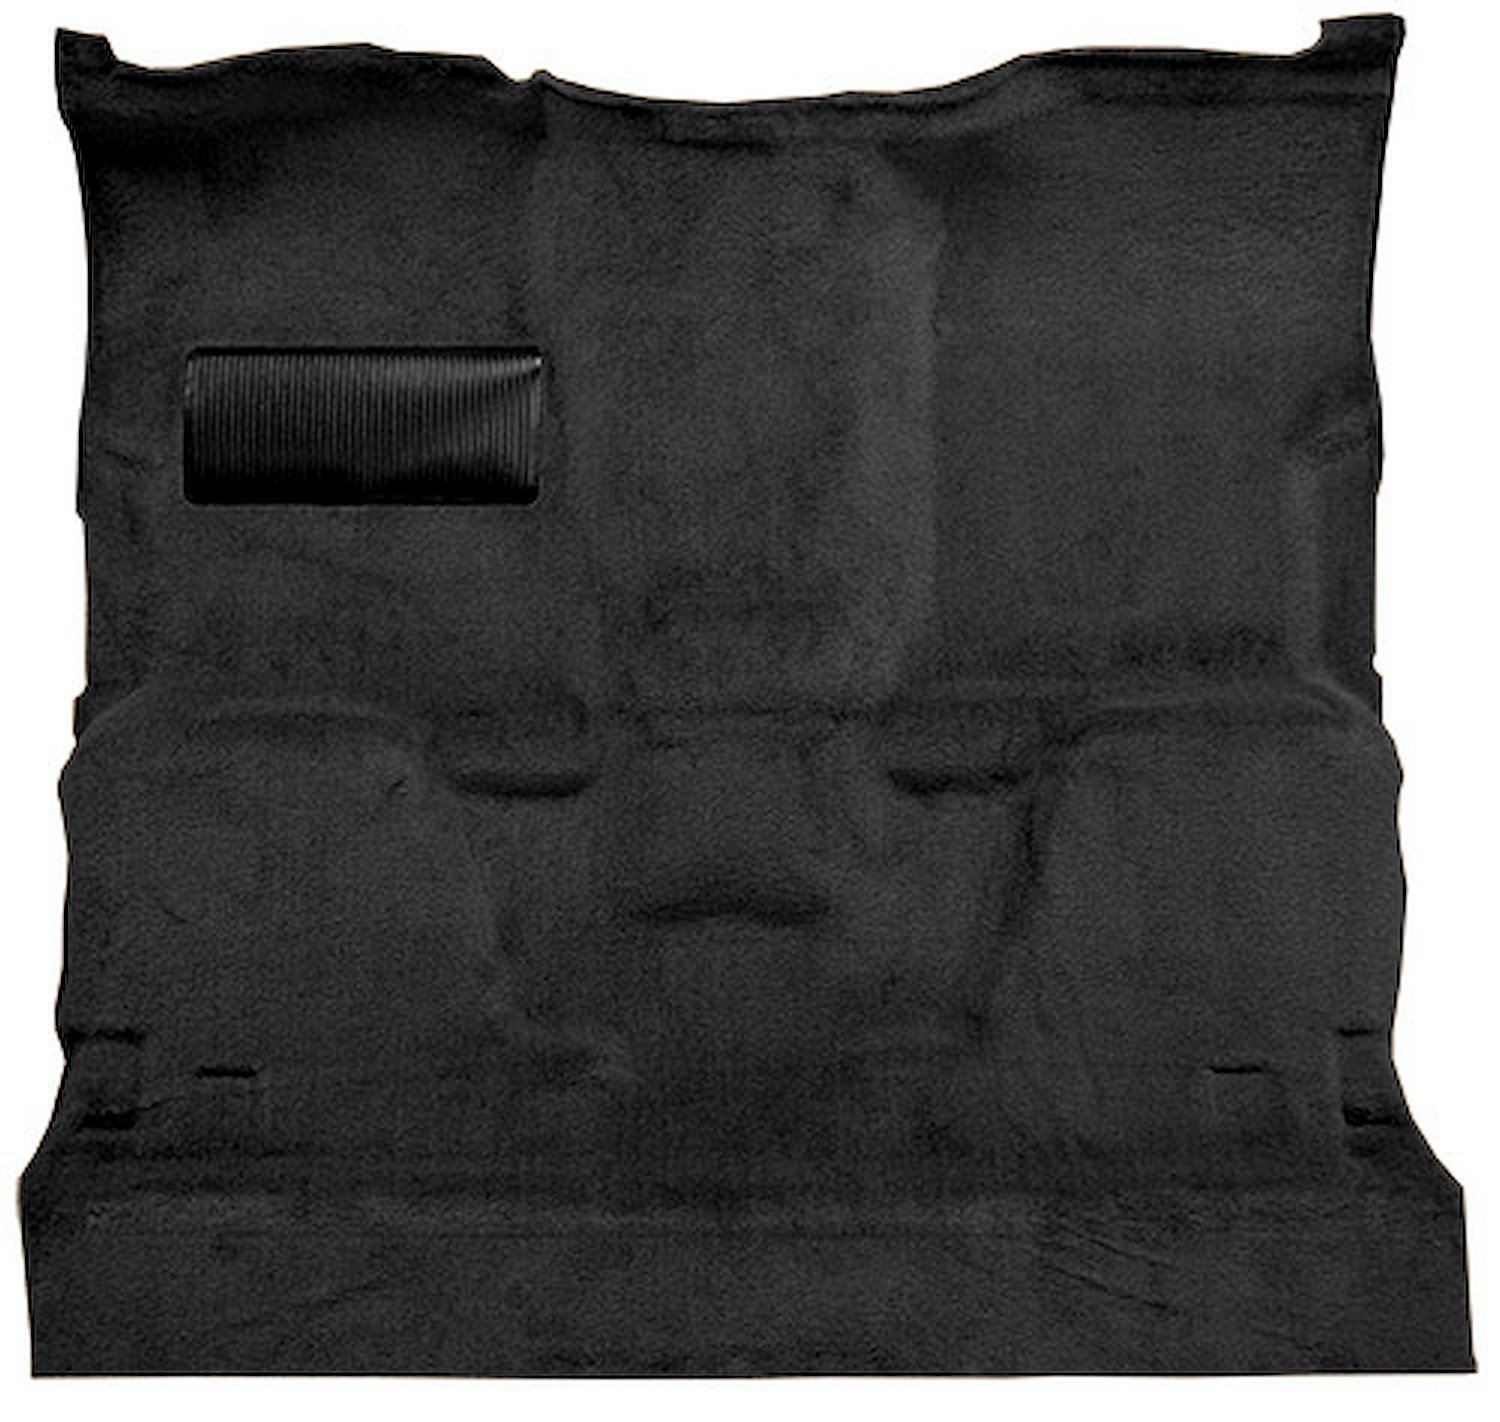 Molded Cut Pile Carpet for 1981-1986 GM C Series Regular Cab Trucks w/Automatic or 3-Speed [Mass Backing Black]